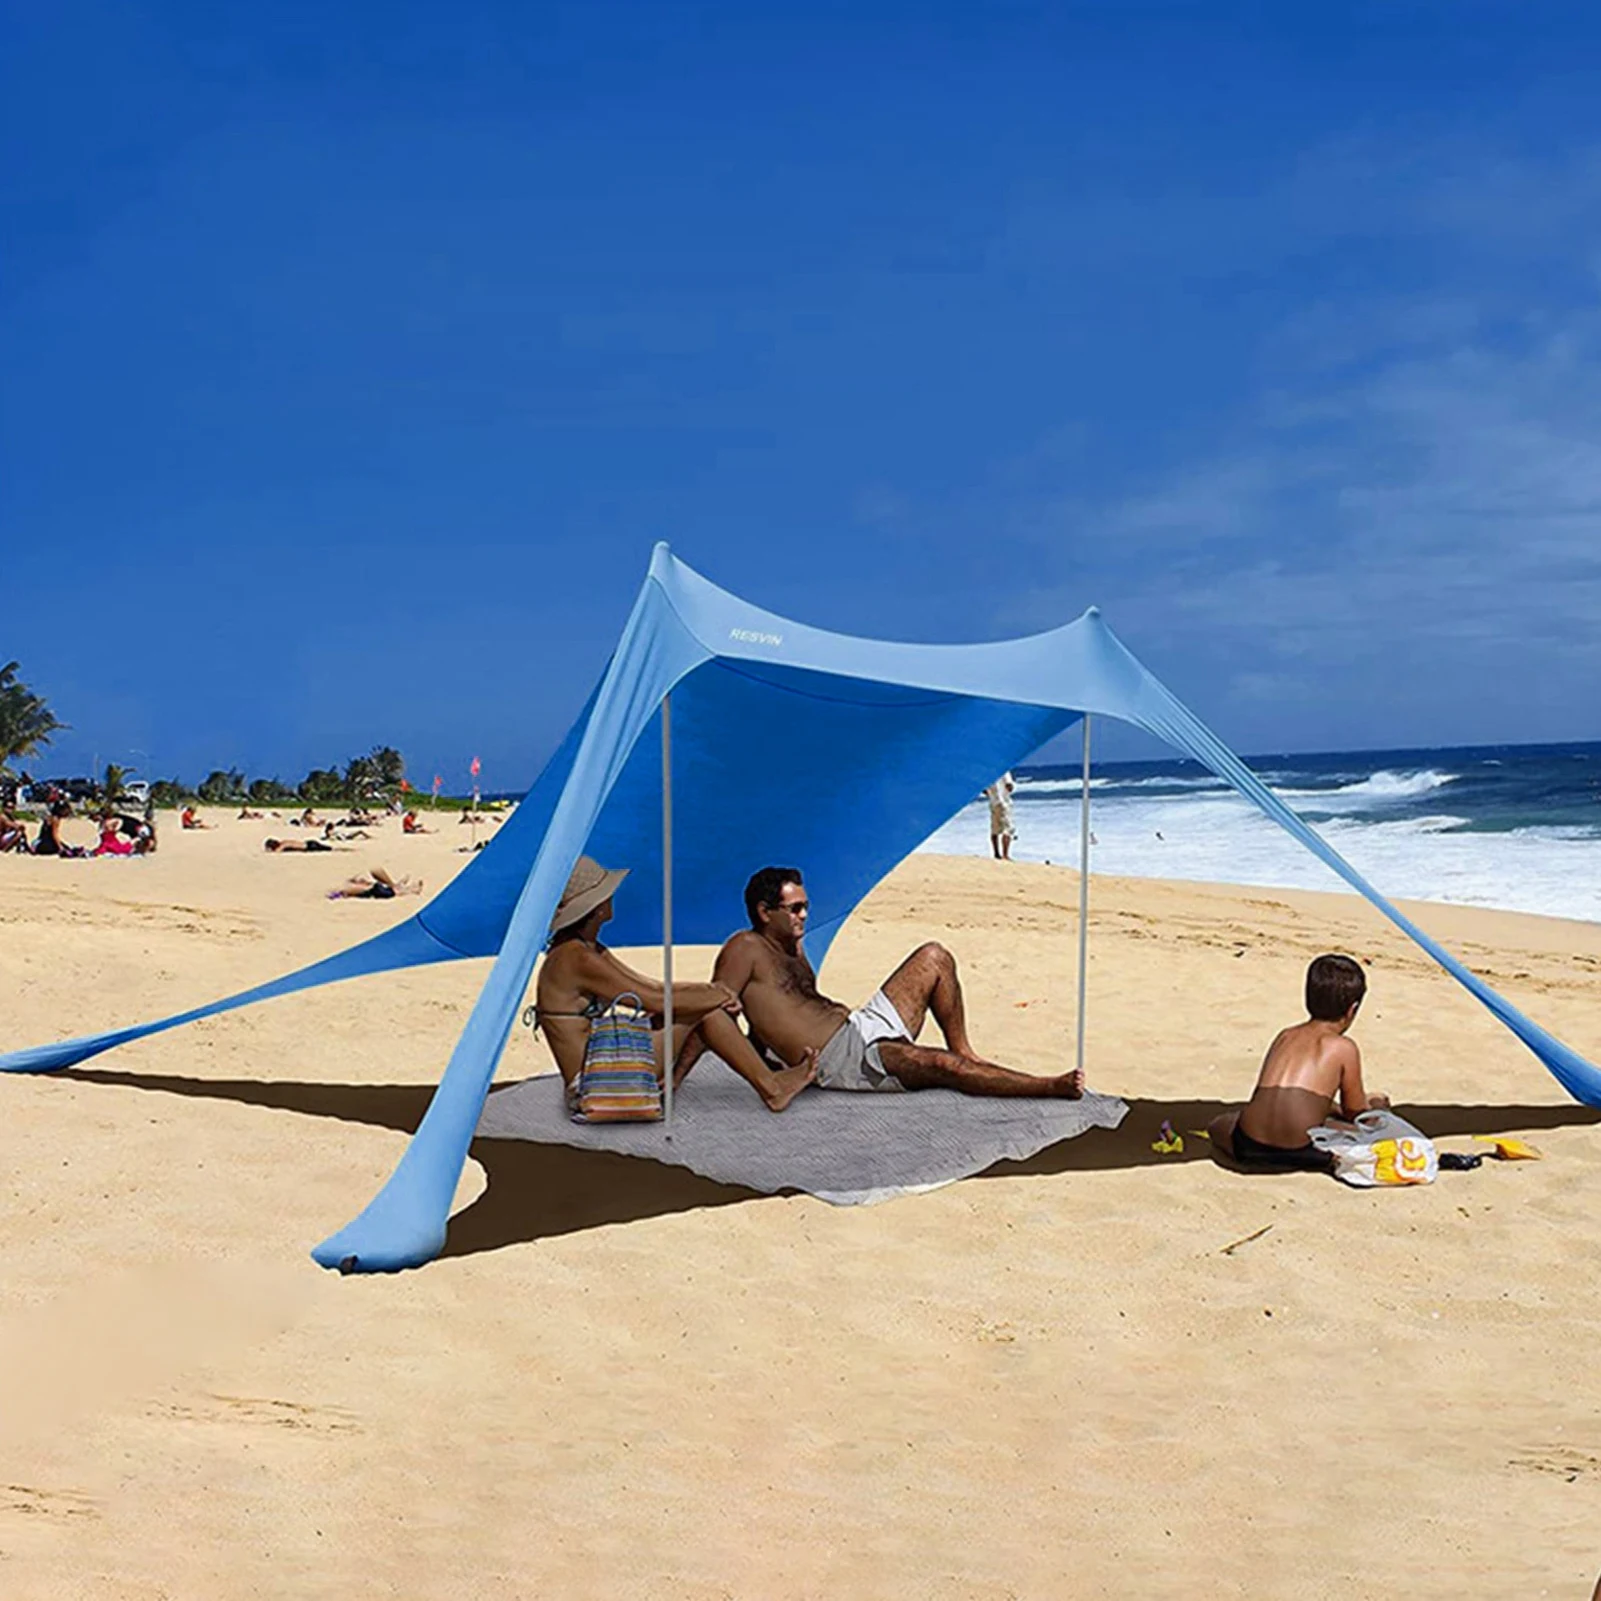 

Beach Sunshade Tent Camping Beach Awning Shade Windproof Sun Shelter Portable Family Tent With 2 Aluminum Poles 1 Carrying Bag